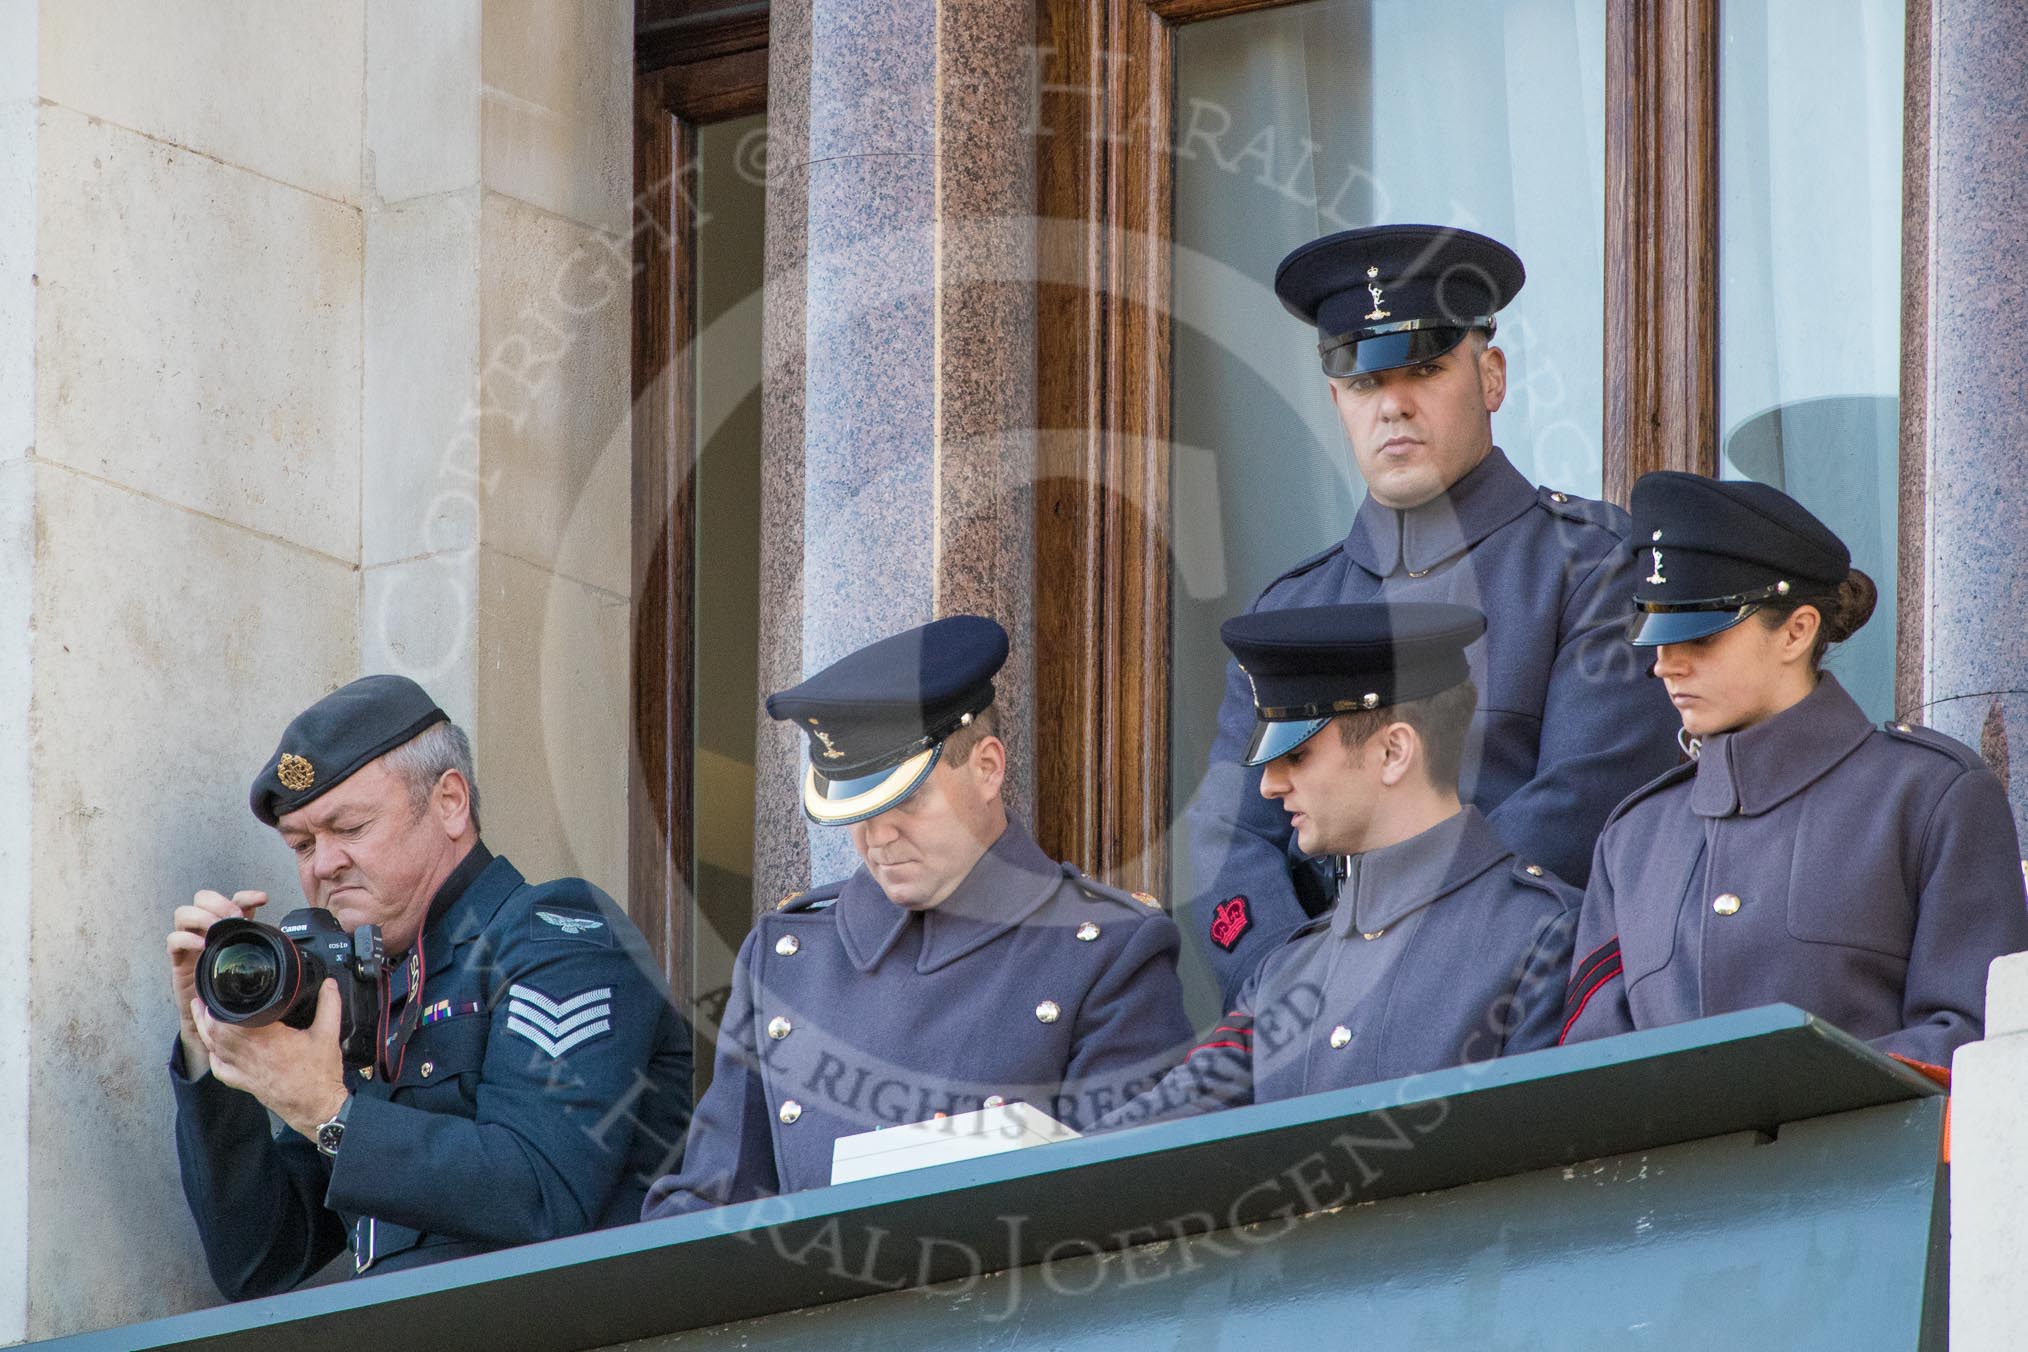 A team of army officers controlling the event's music (?), and an army photographer, on a top floor window of teh Foreign and Commonwealth Office during the Remembrance Sunday Cenotaph Ceremony 2018 at Horse Guards Parade, Westminster, London, 11 November 2018, 11:19.